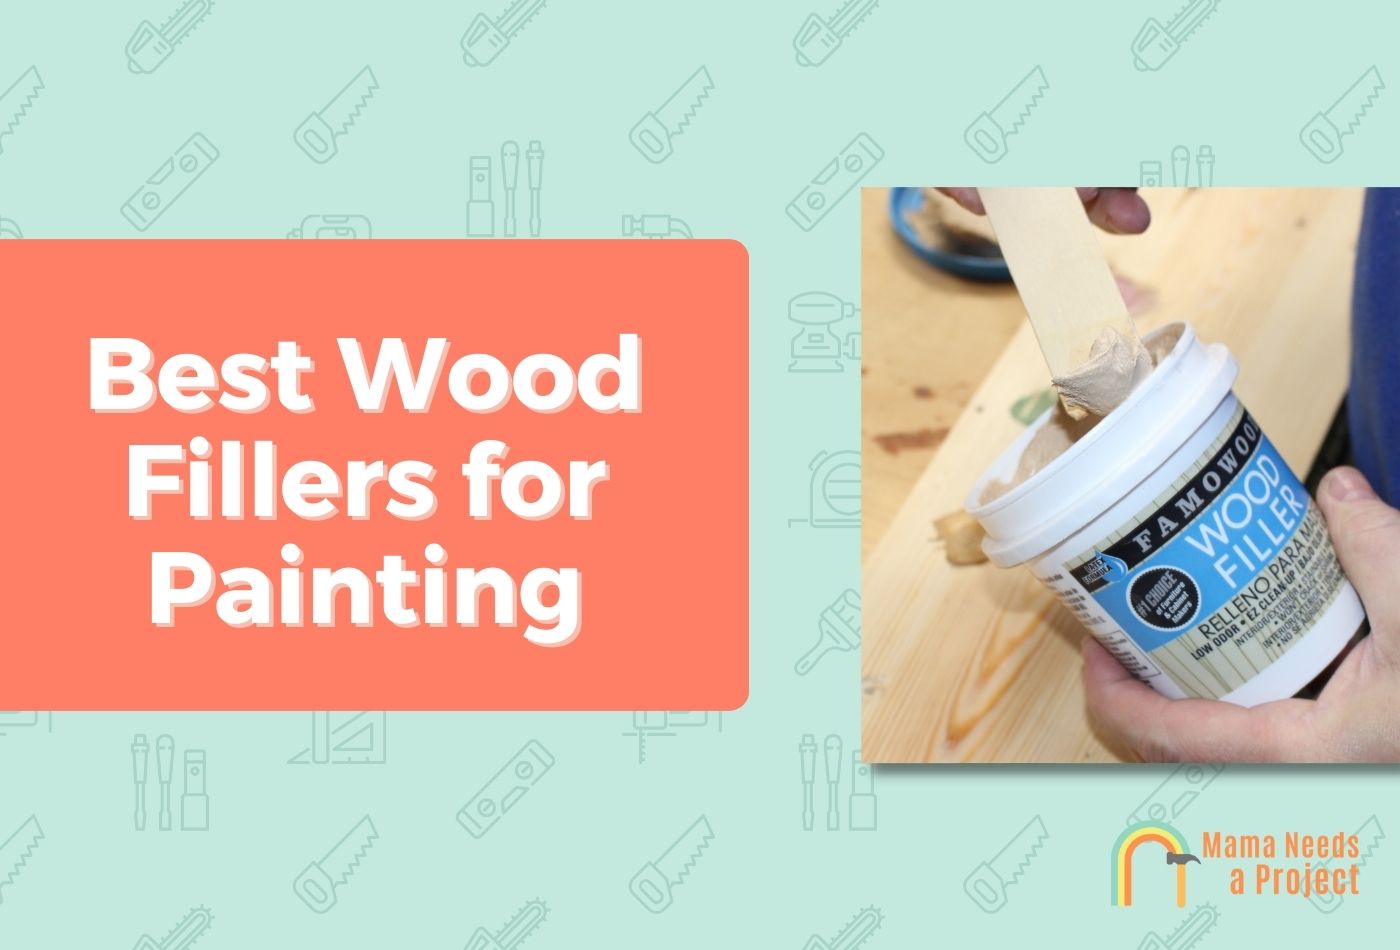 Best Wood Fillers for Painting